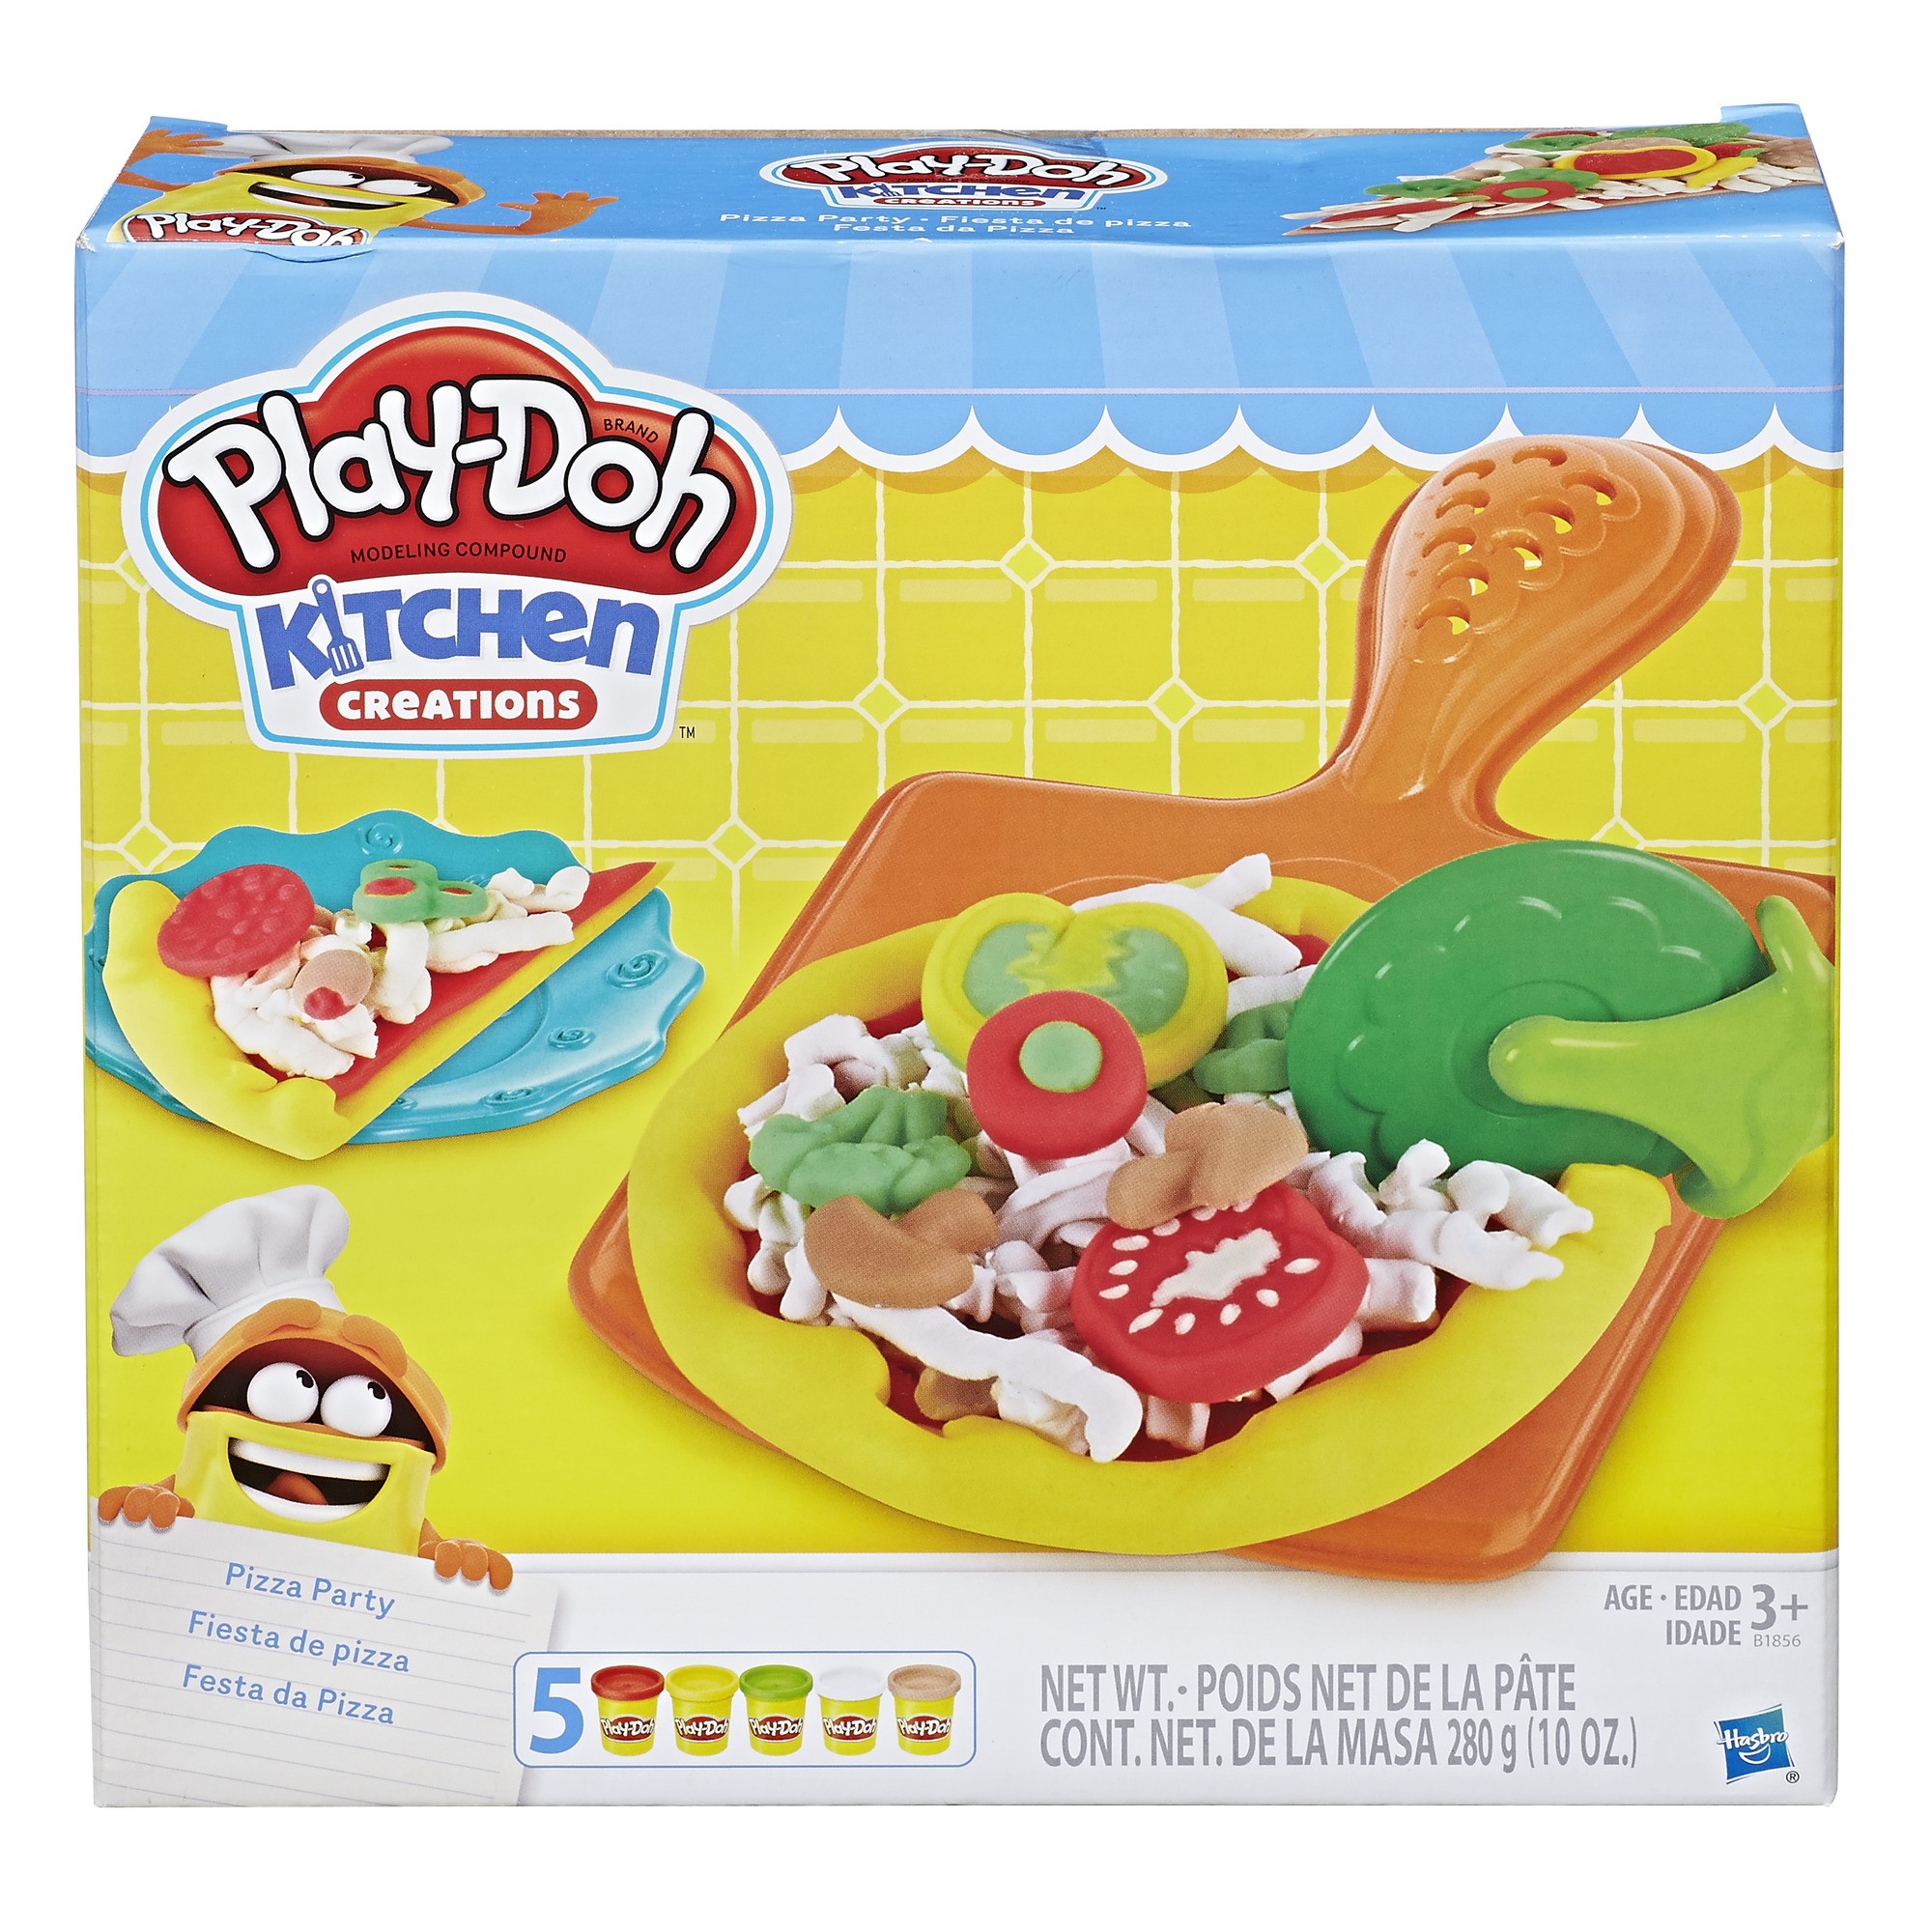 Play-doh Kitchen Creations Pizza Party Food Set with 5 Cans of Play-Doh - image 1 of 7